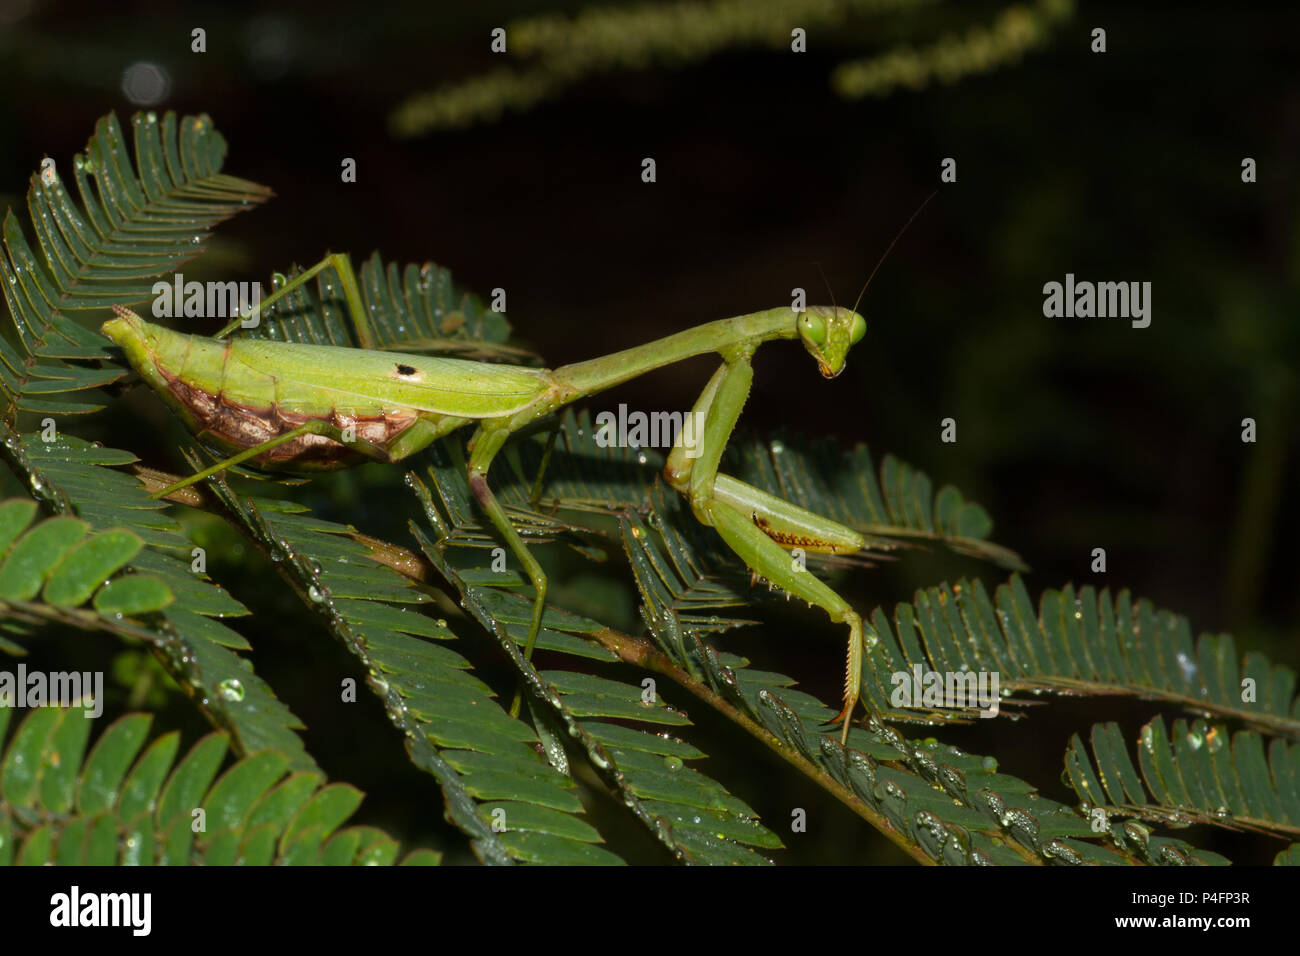 A gravid praying mantid on a mimosa leaf. Stock Photo